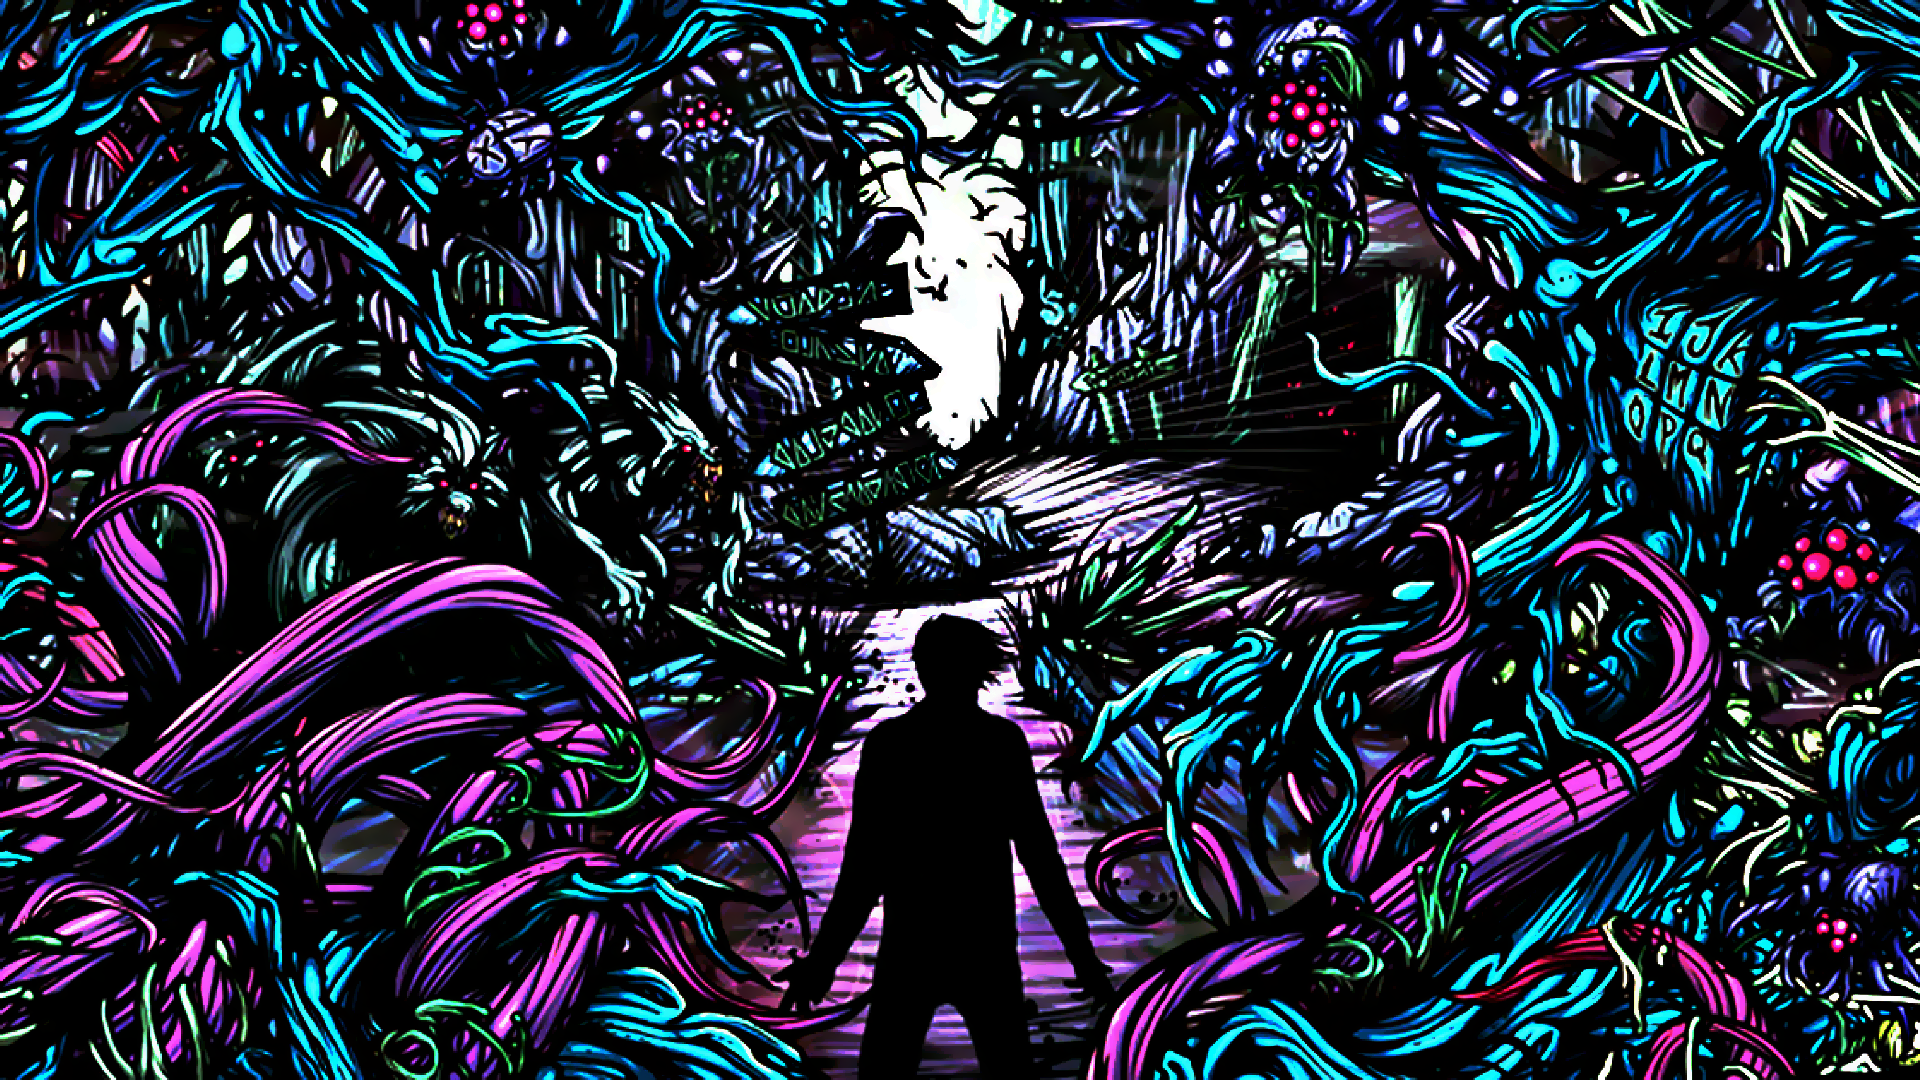 A Day To Remember Homesick Album Cover Wallpaper Image